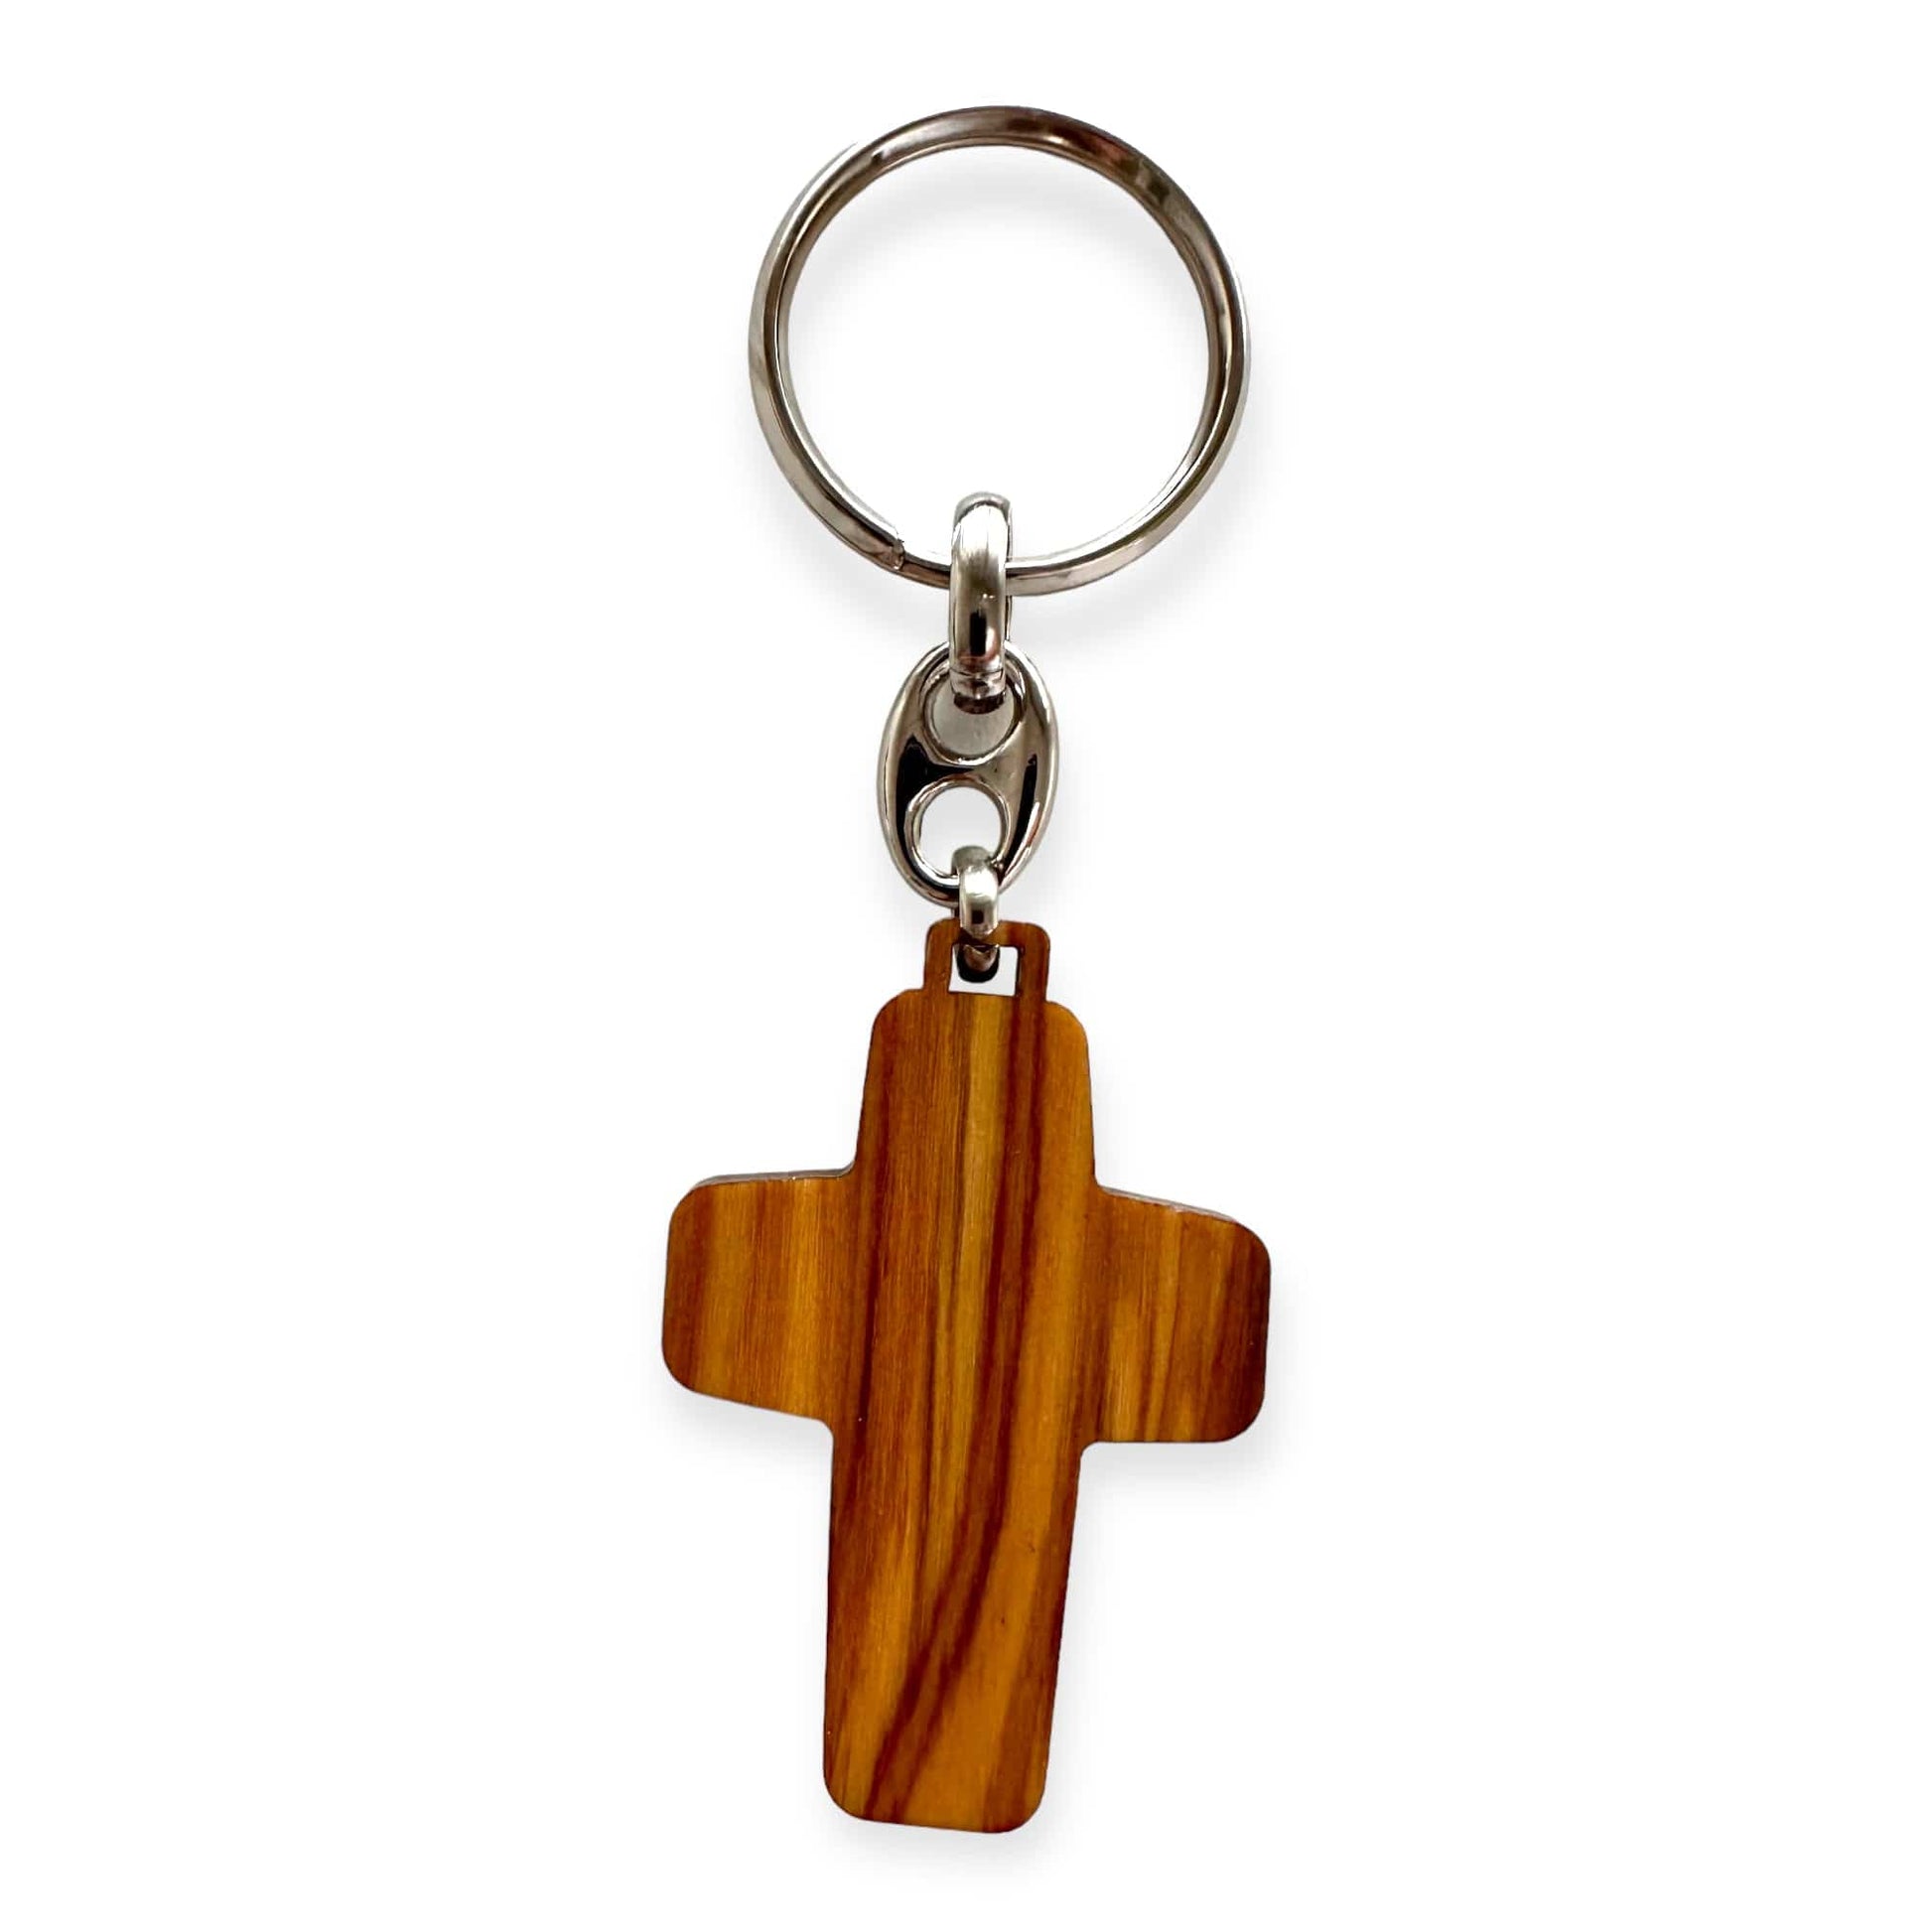 Catholically Keyring Vedele - Key Ring Pope Francis Pectoral Cross - Crucifix - Blessed By Pope